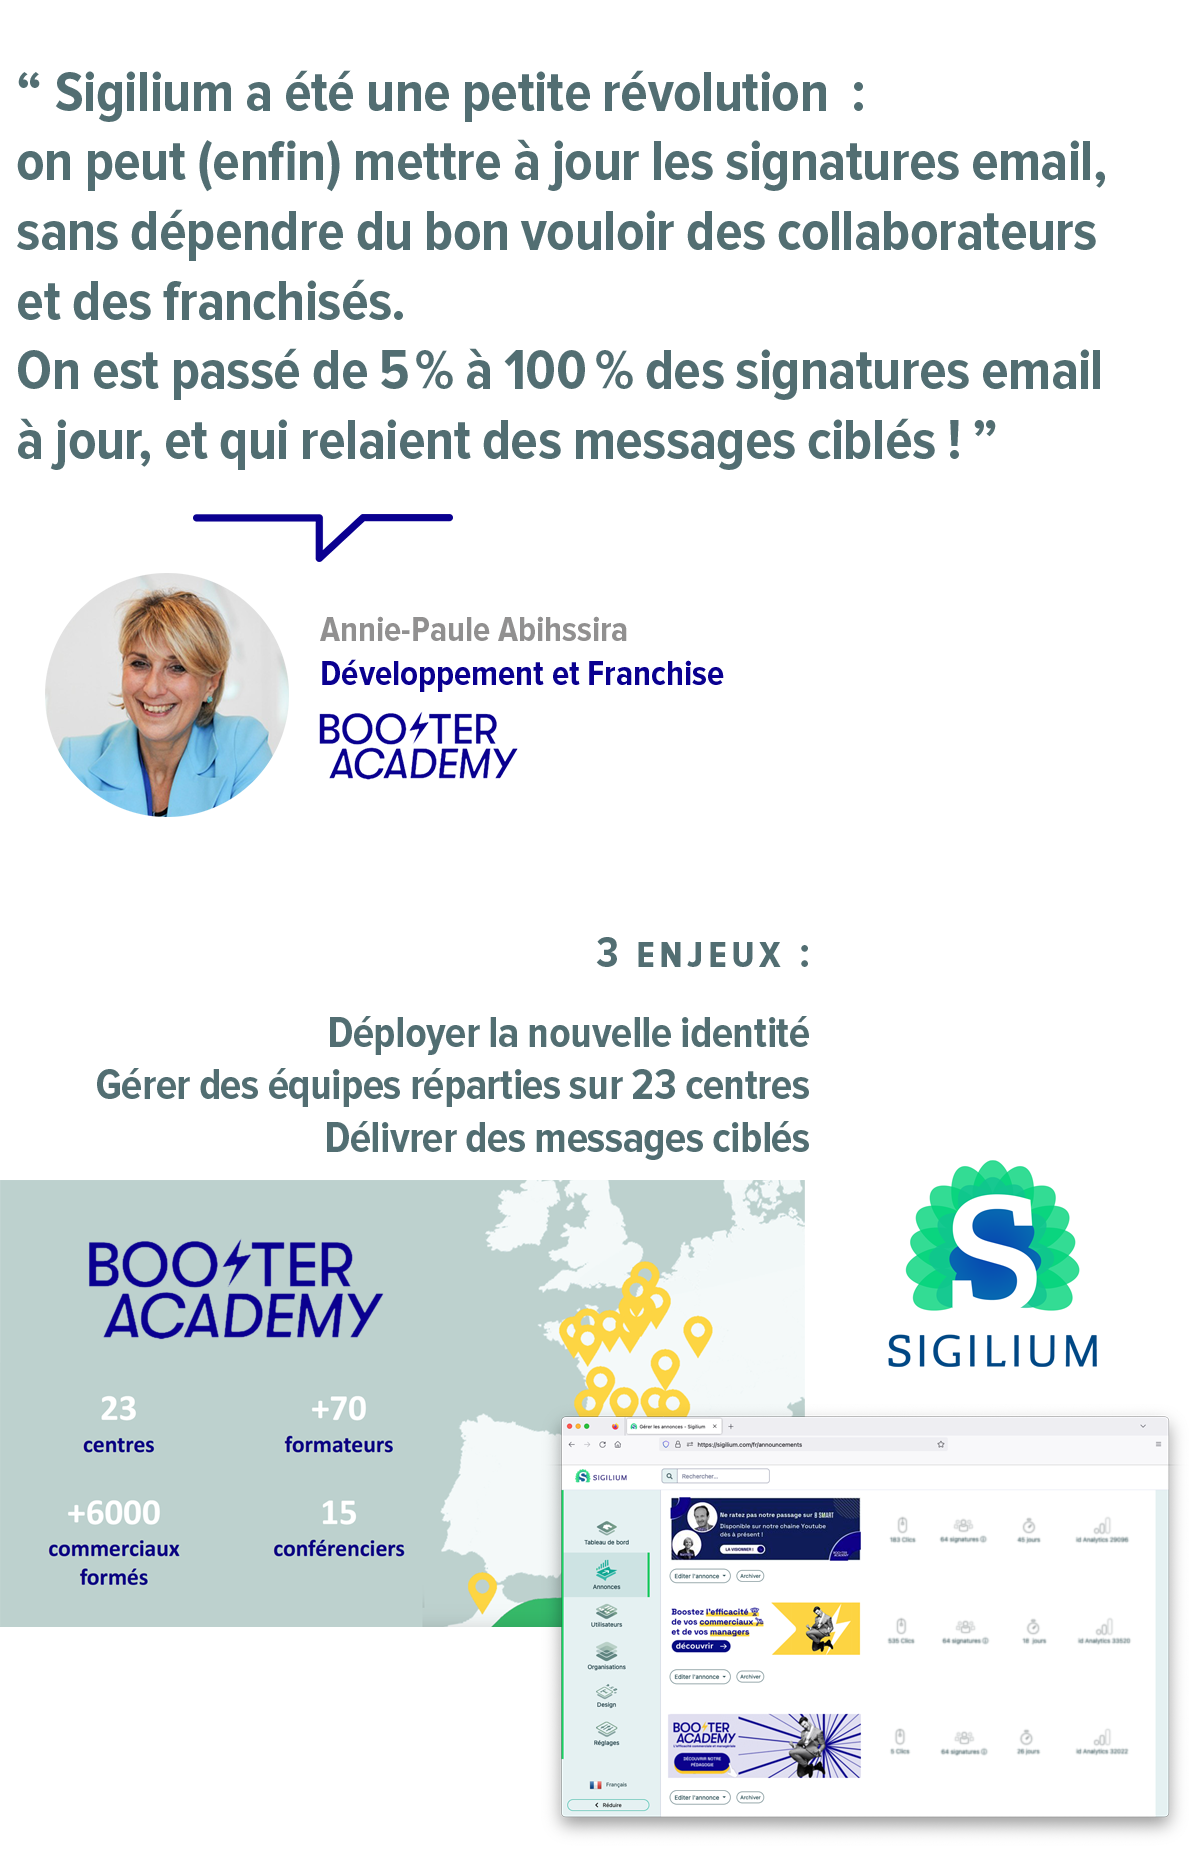 Discover how Booster Academy generates interest and actions of their contact using smart signatures email thanks to Sigilium.